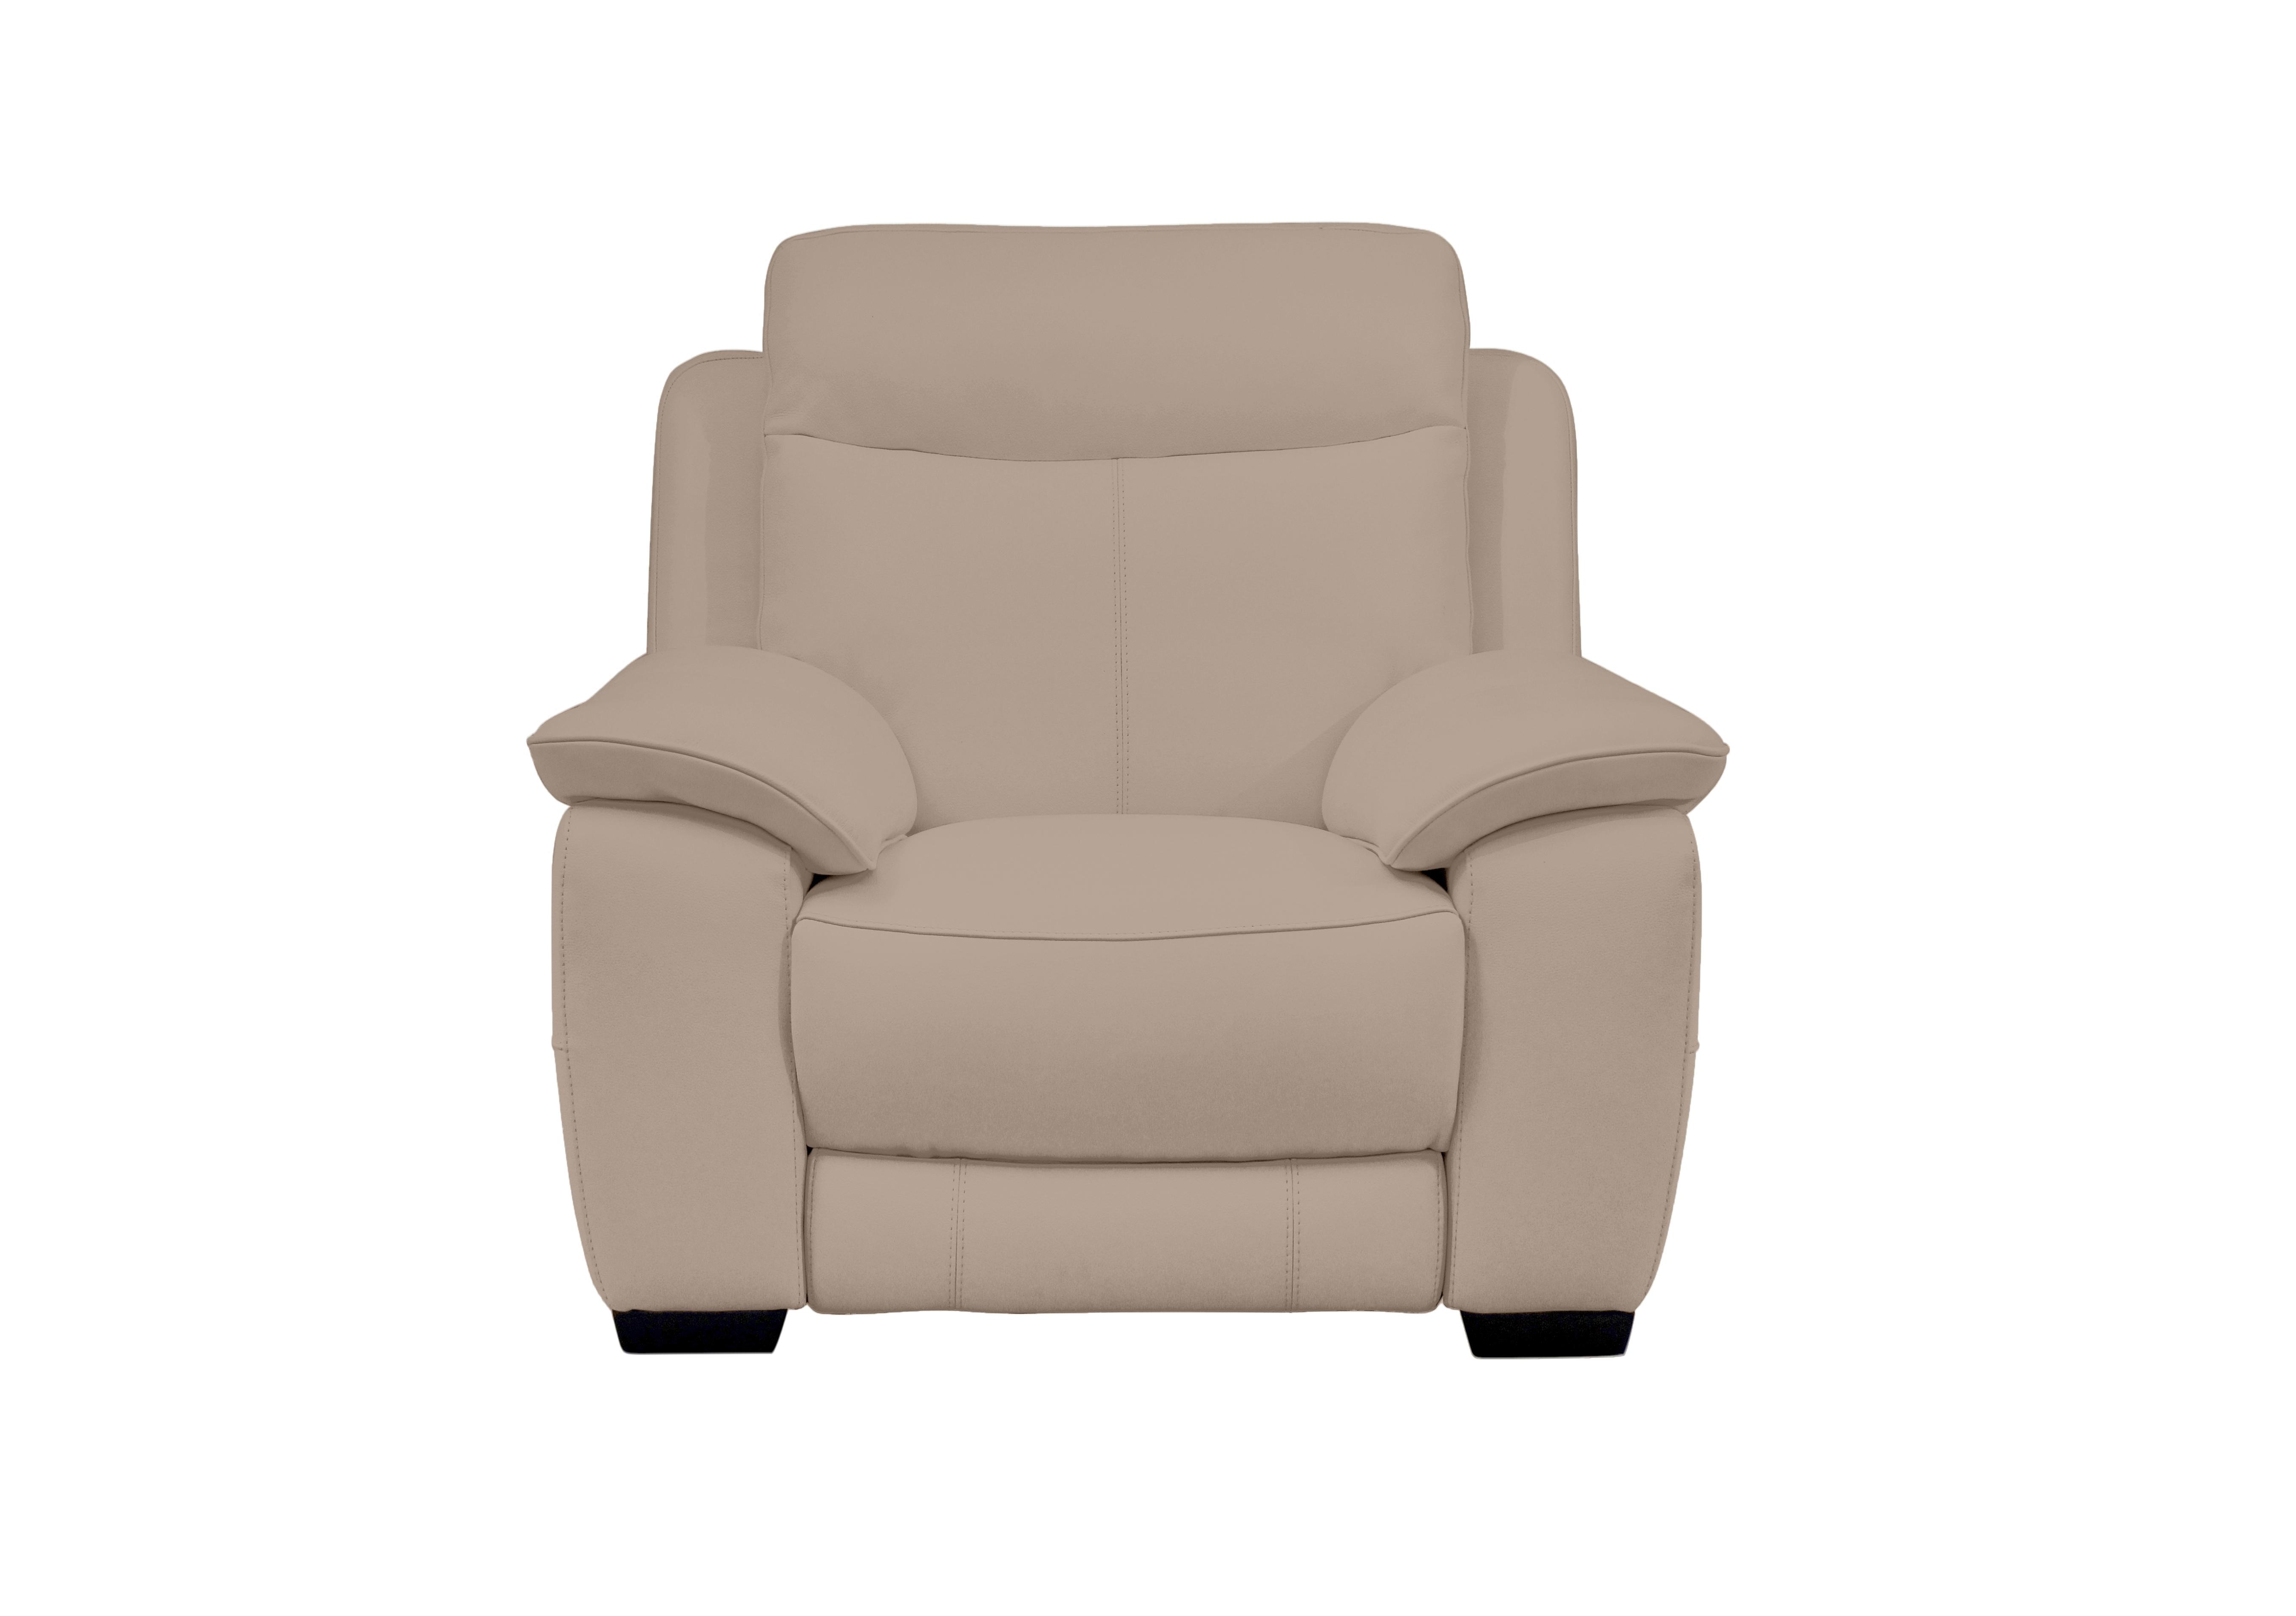 Starlight Express Leather Power Armchair with Power Headrest in Bv-039c Pebble on Furniture Village